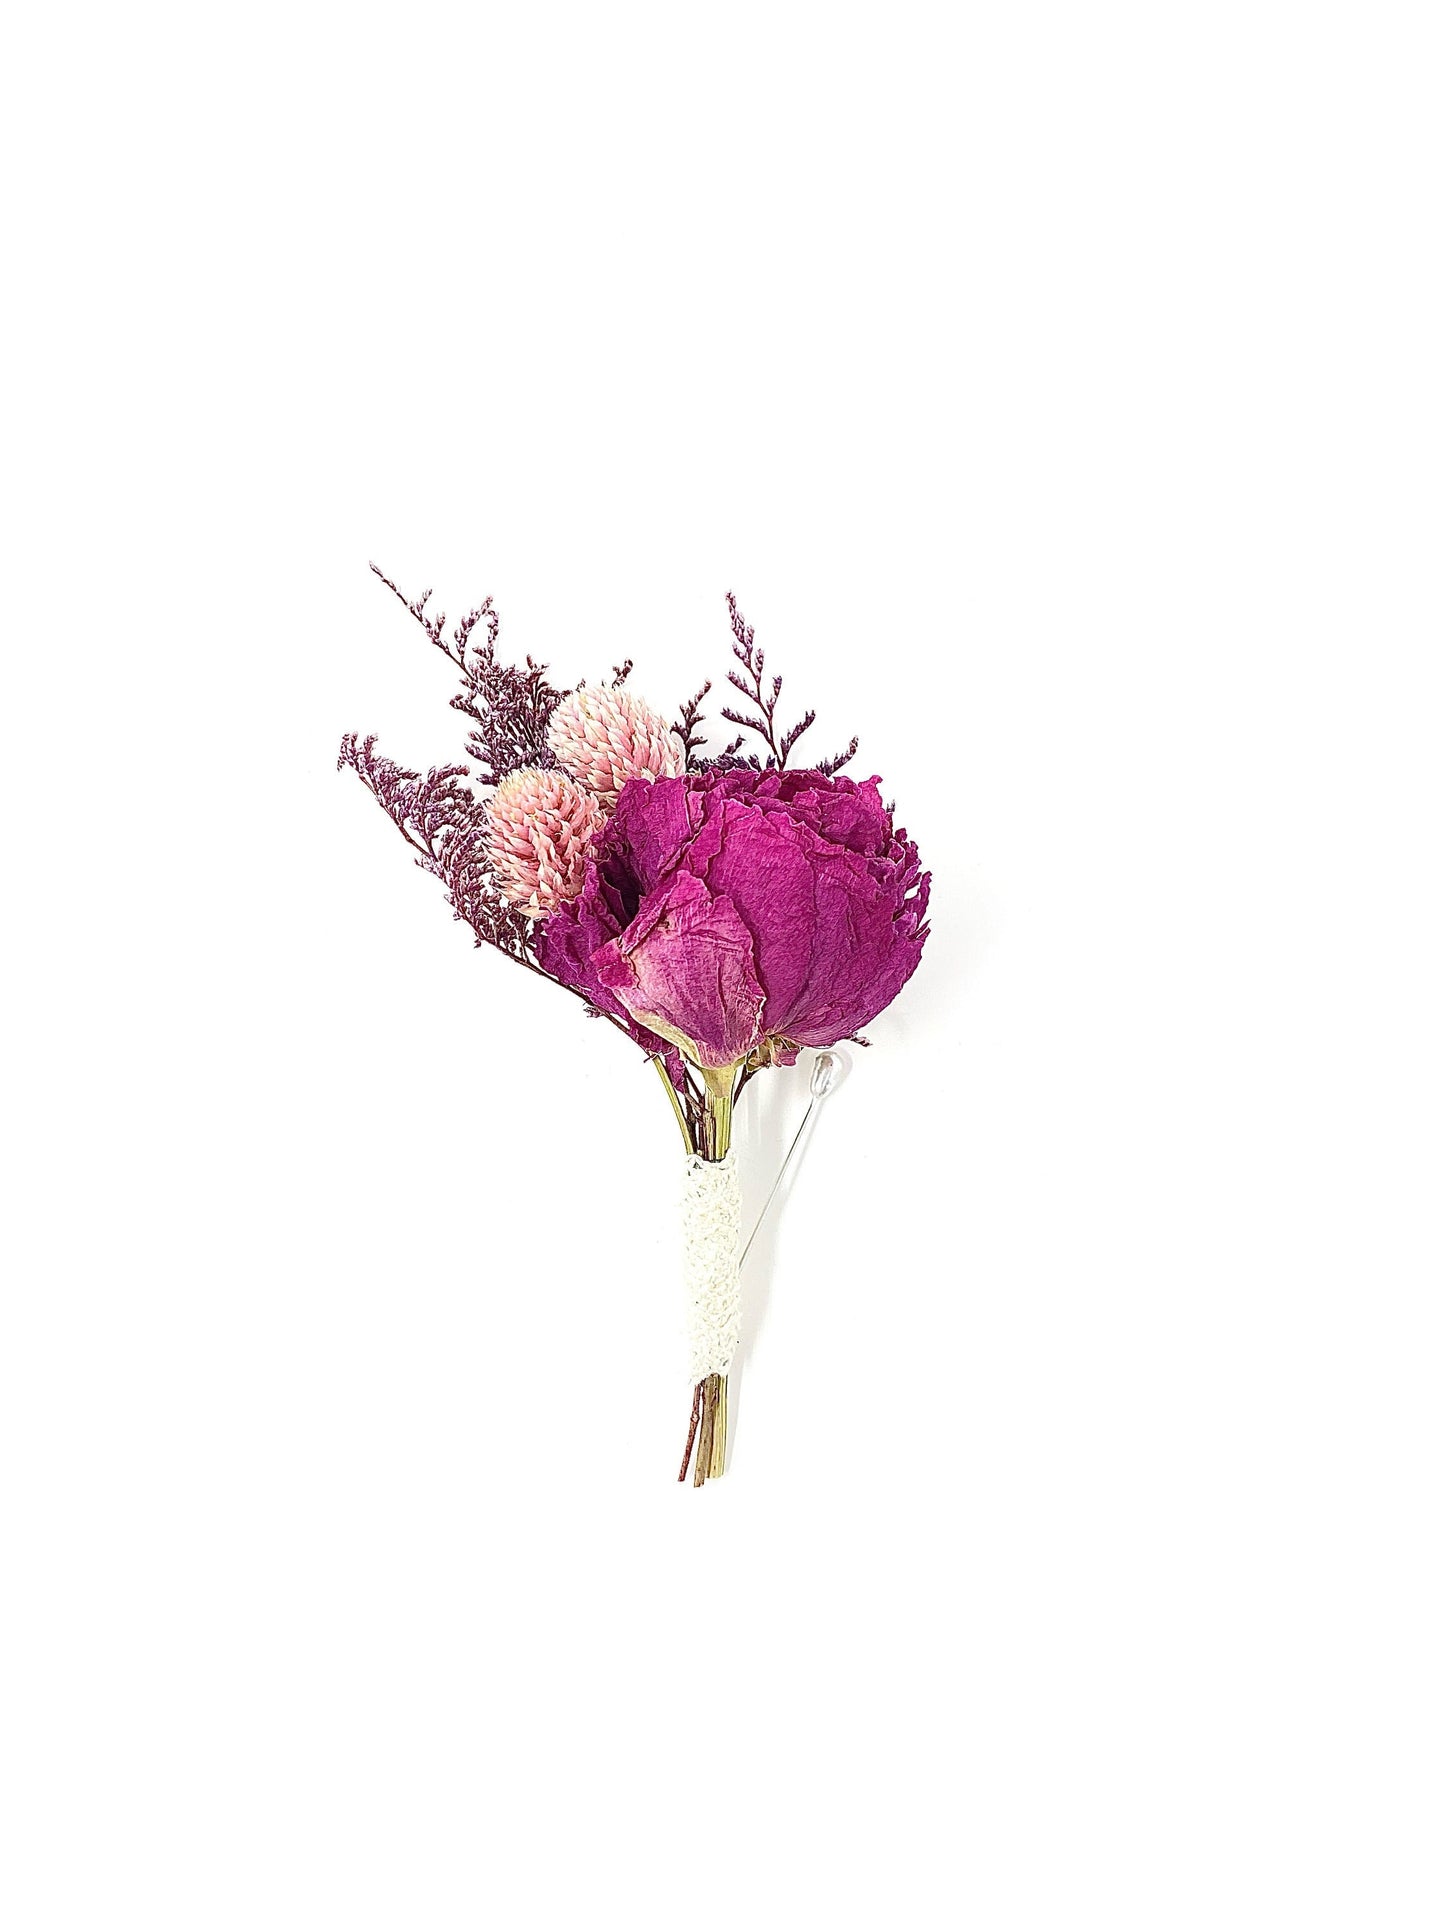 Wedding Boutonniere, Dried Flowers, Preserved Floral, Peony, Decor, Bridal Accessories, Pink and Purple